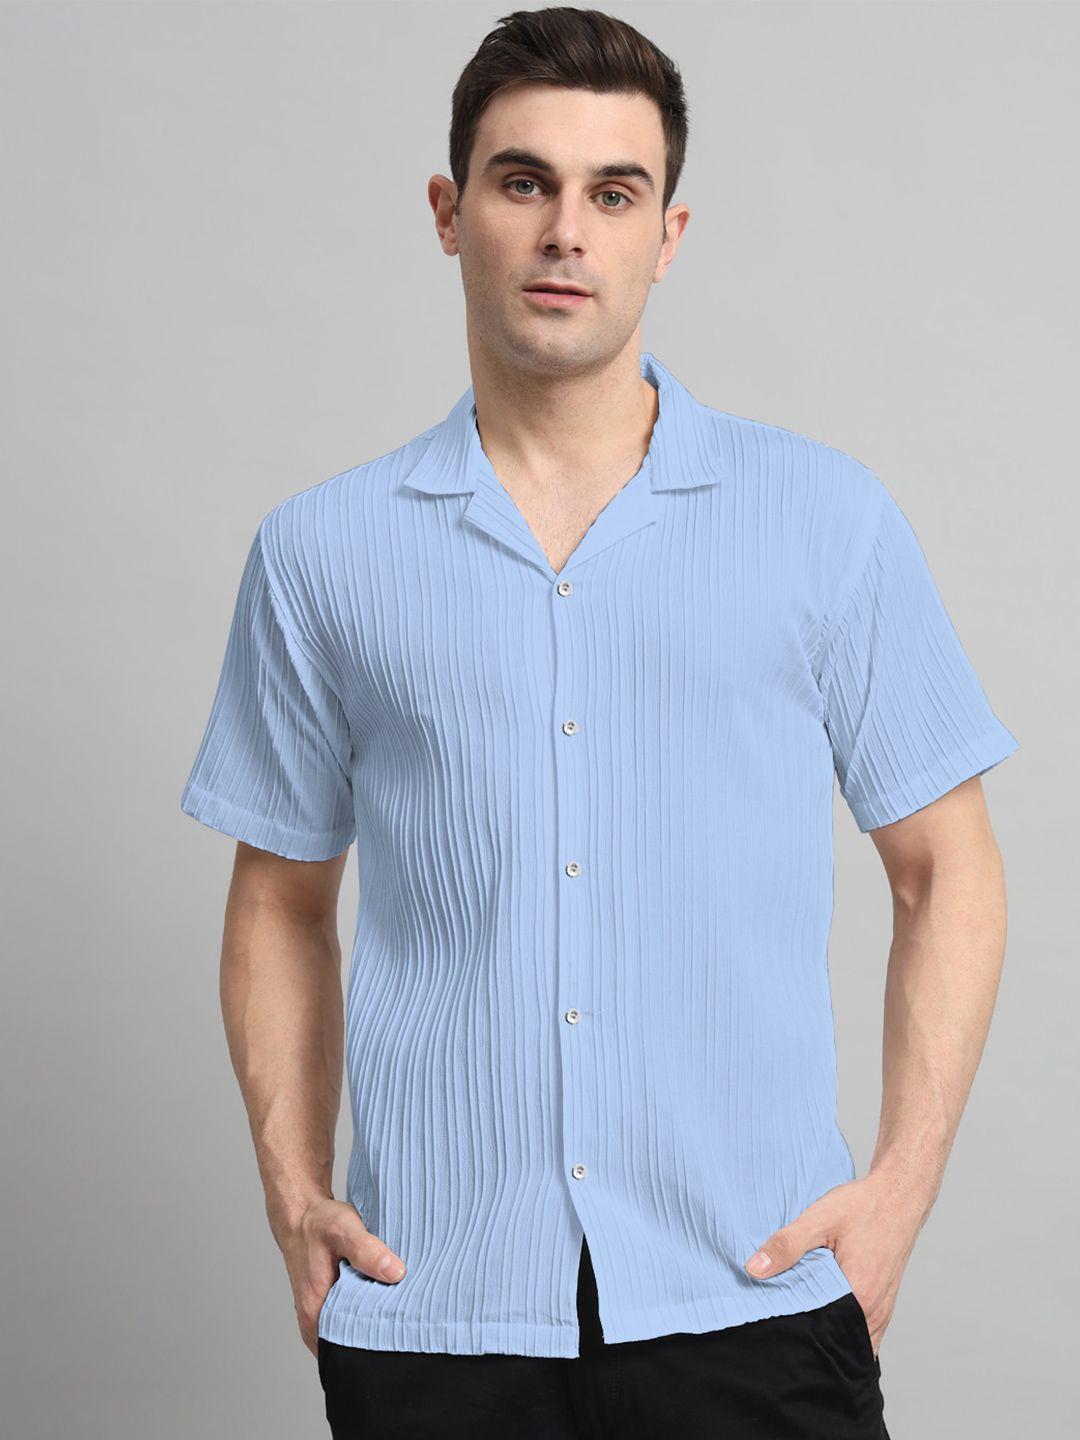 Wuxi Classic Striped Spread Collar Short Sleeves Casual Shirt